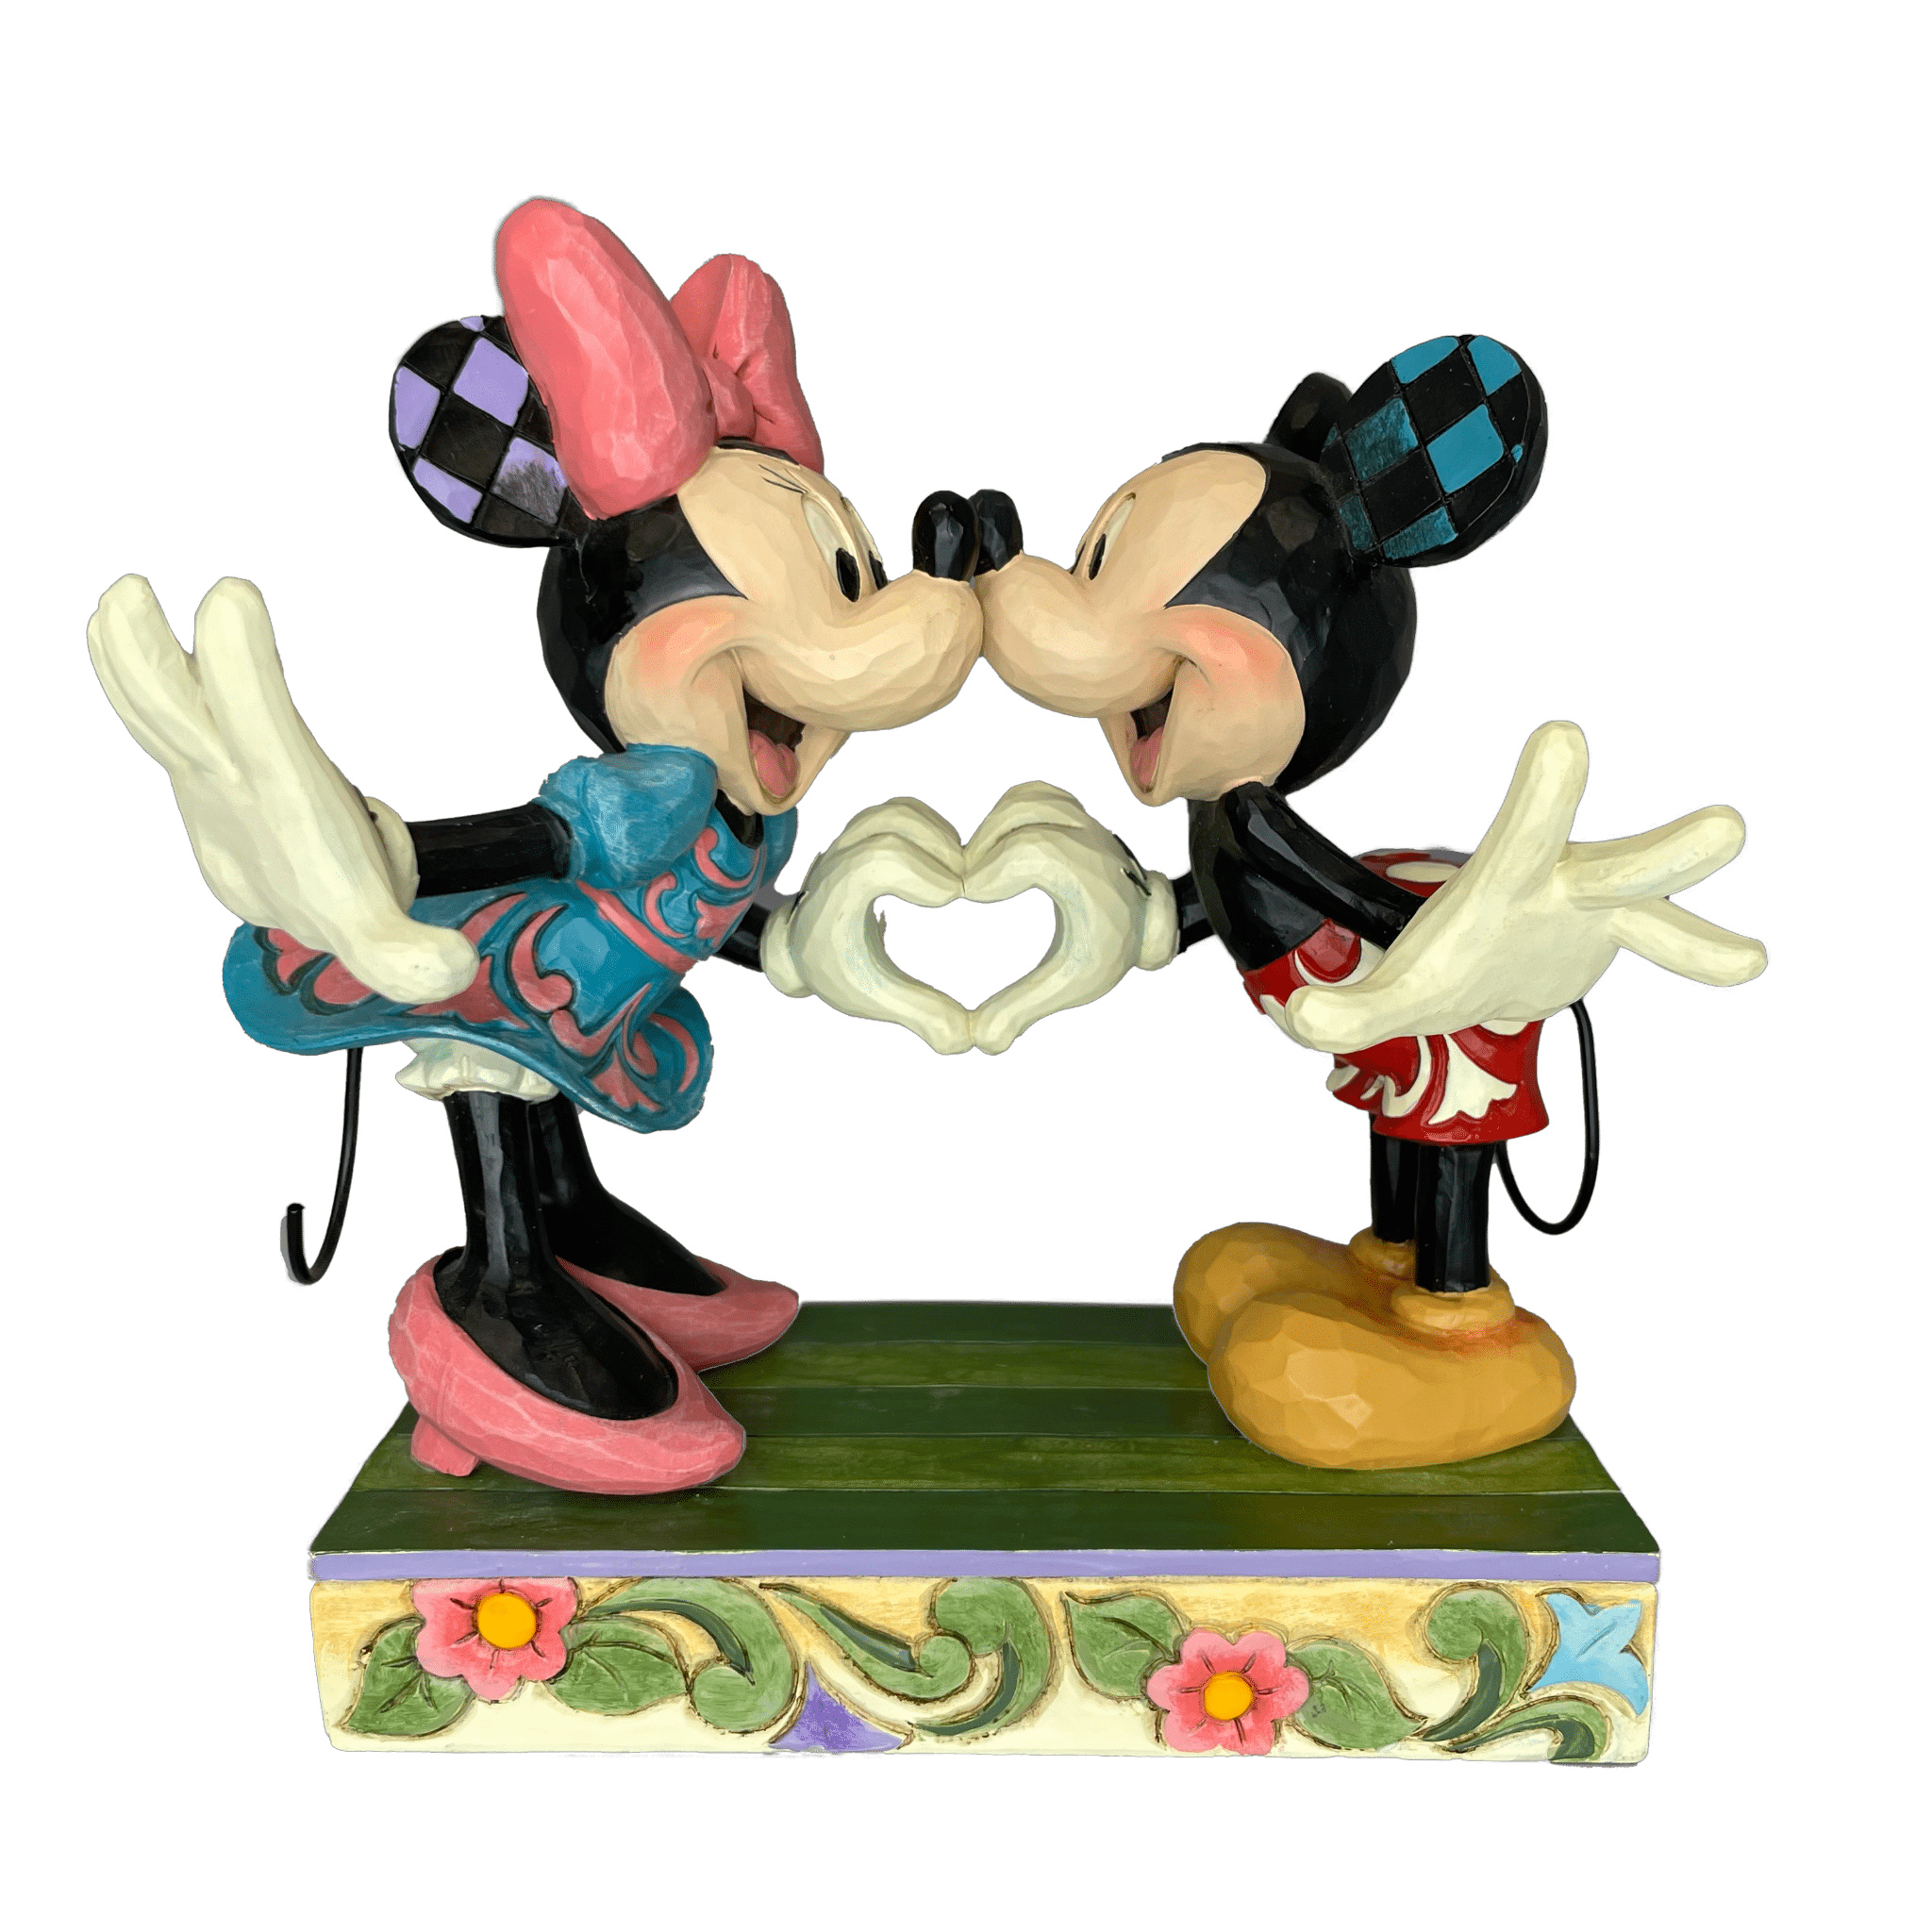 Mickey and Minnie with Heart Hands